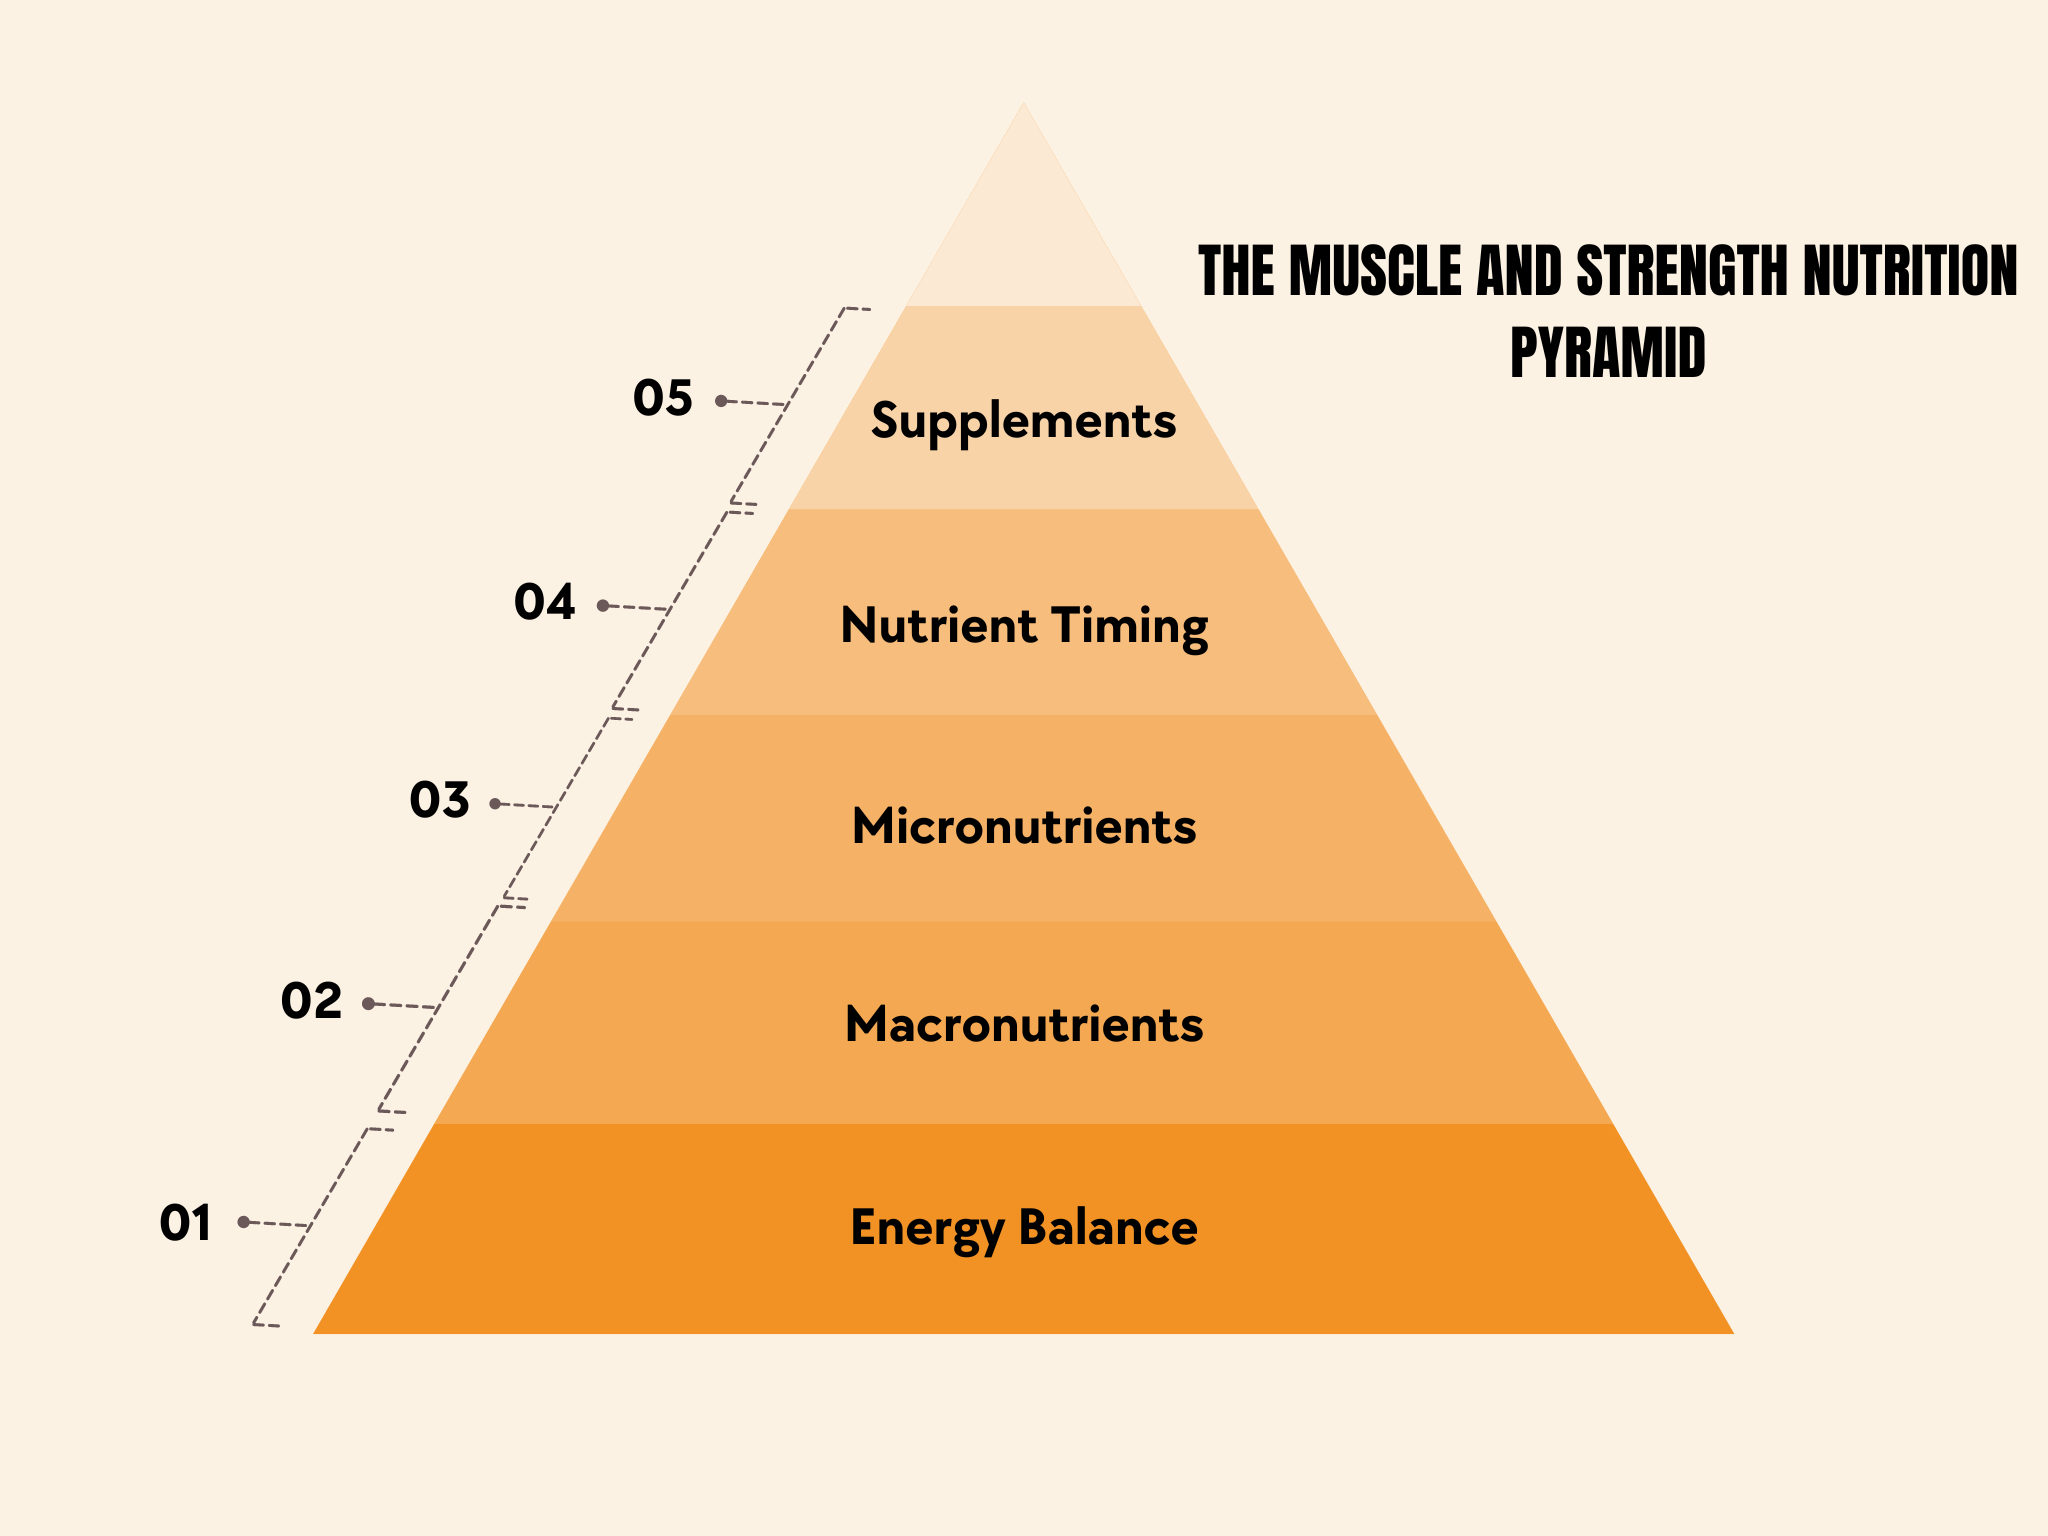 The Muscle and Strength Nutrition Pyramid